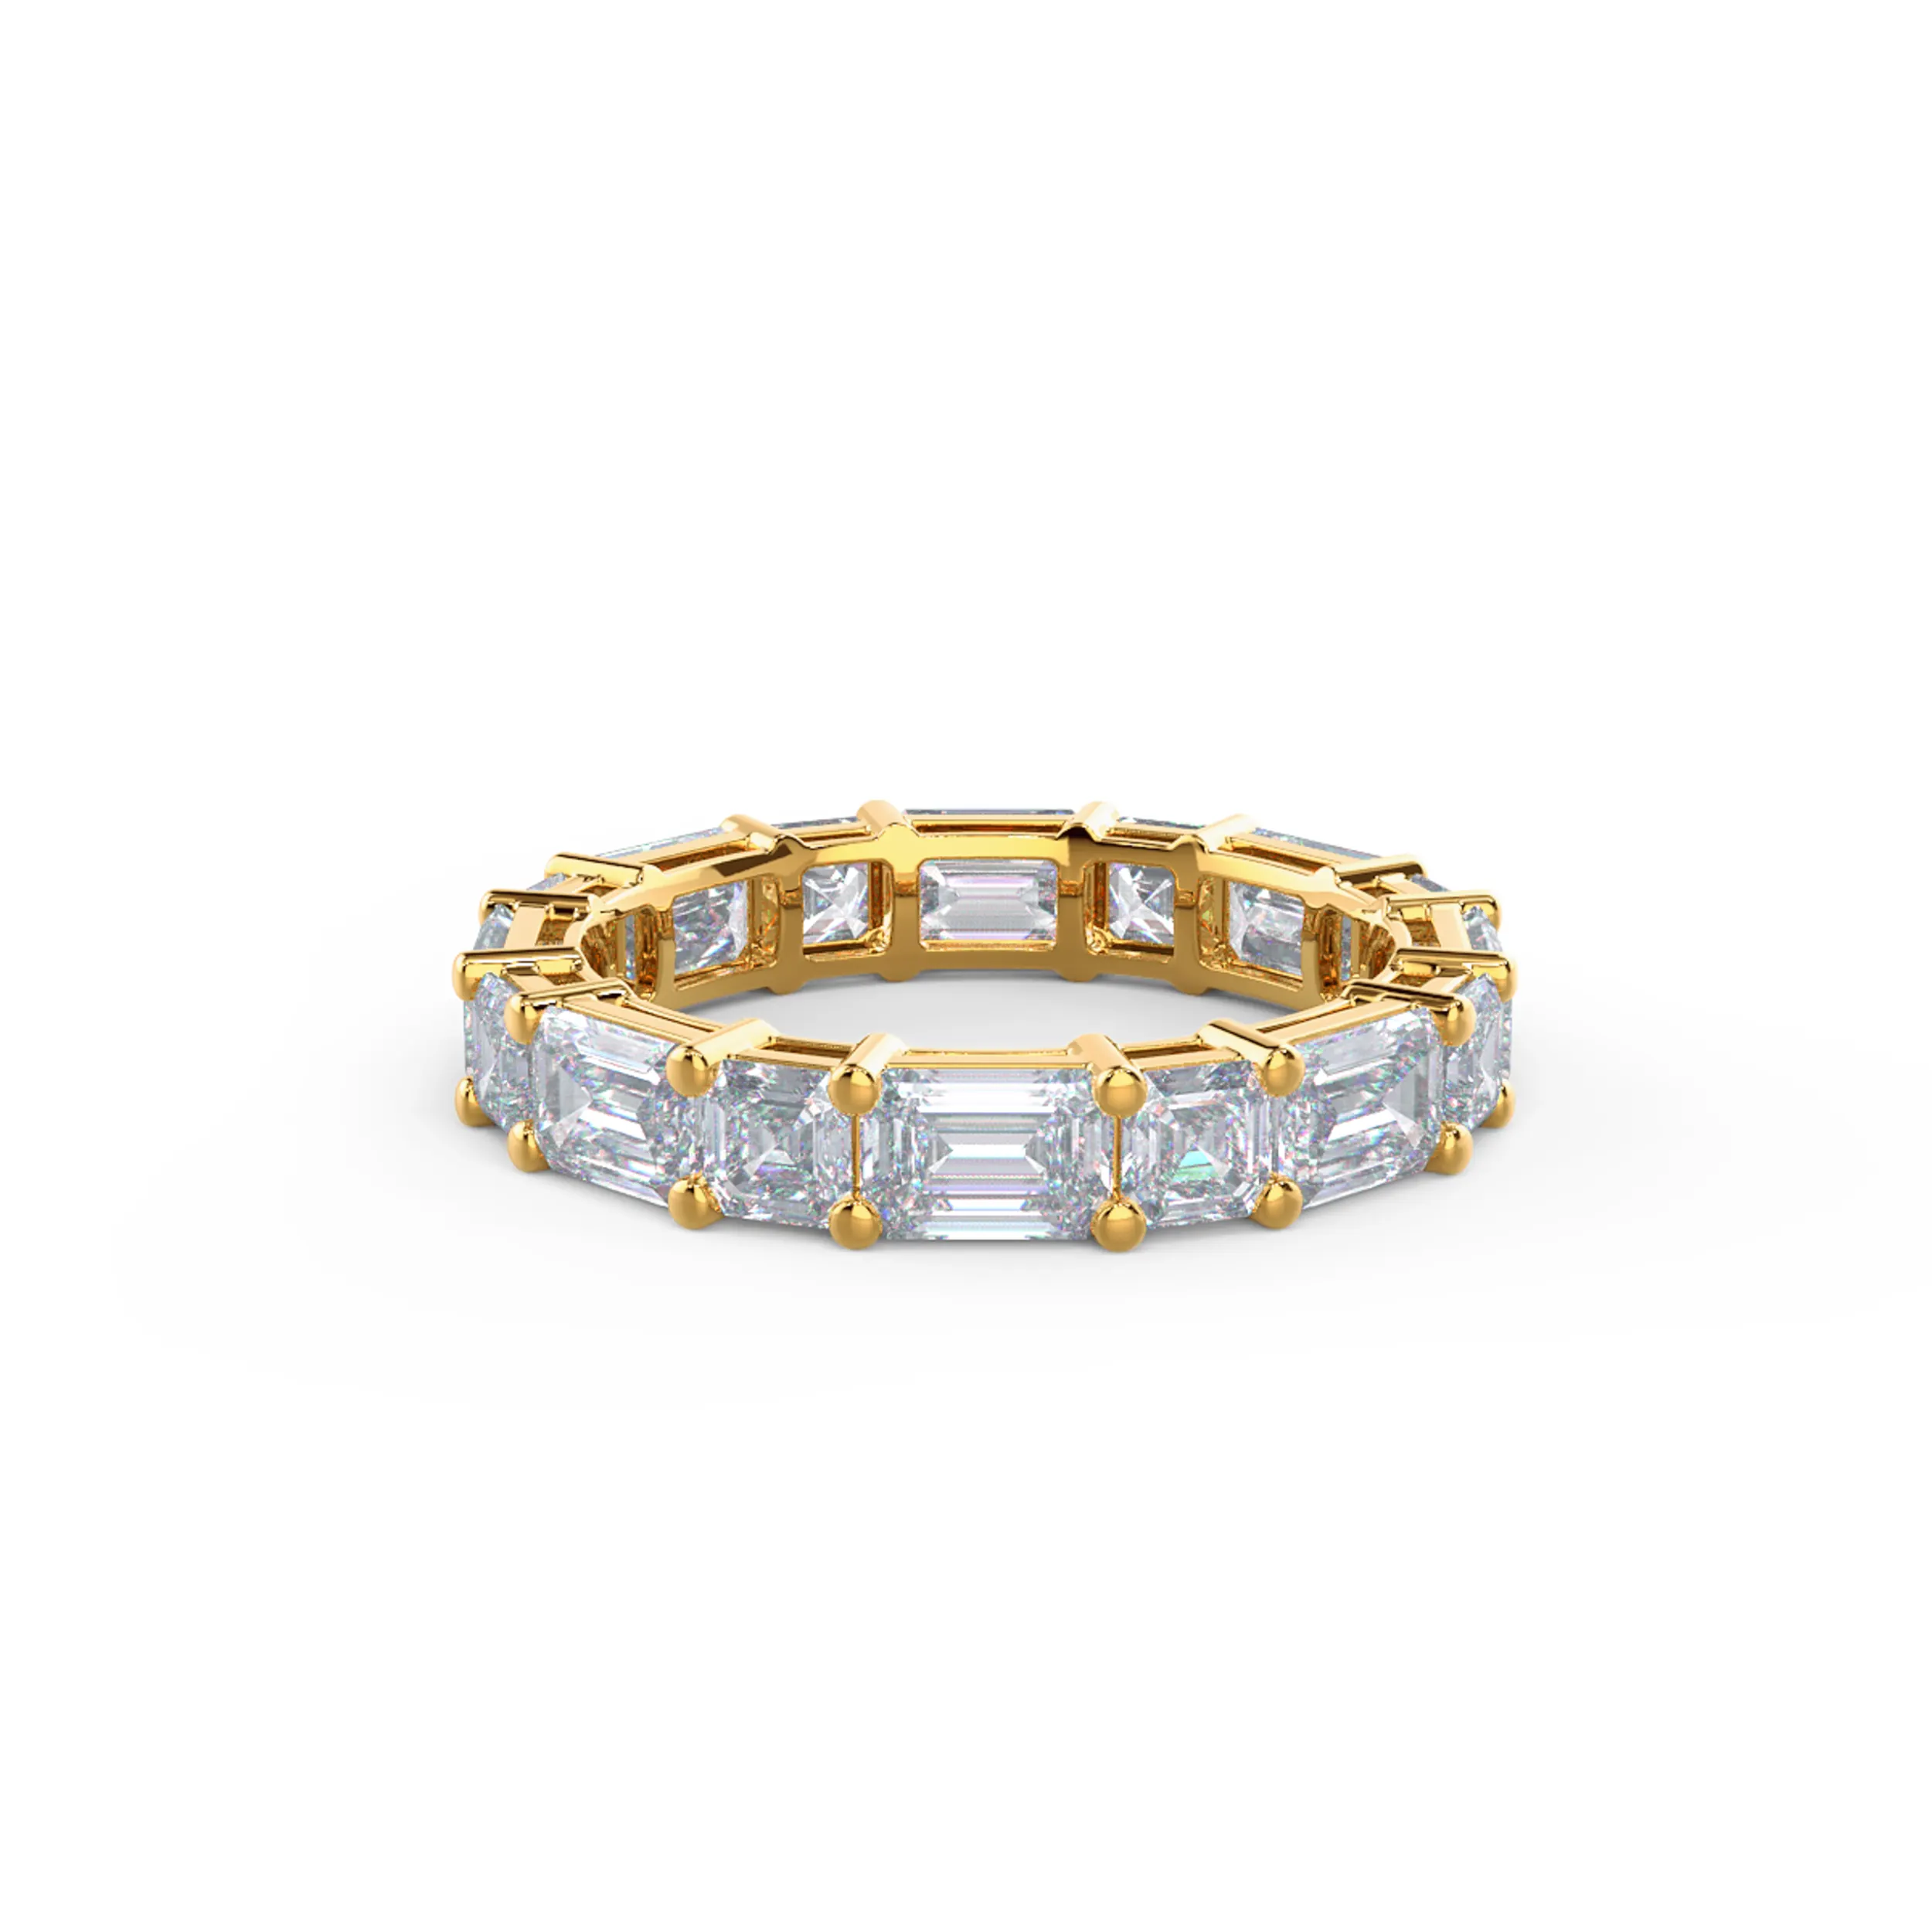 18k Yellow Gold Emerald and Asscher East-West Eternity Band featuring Exceptional Quality 4.8 Carat Diamonds (Main View)